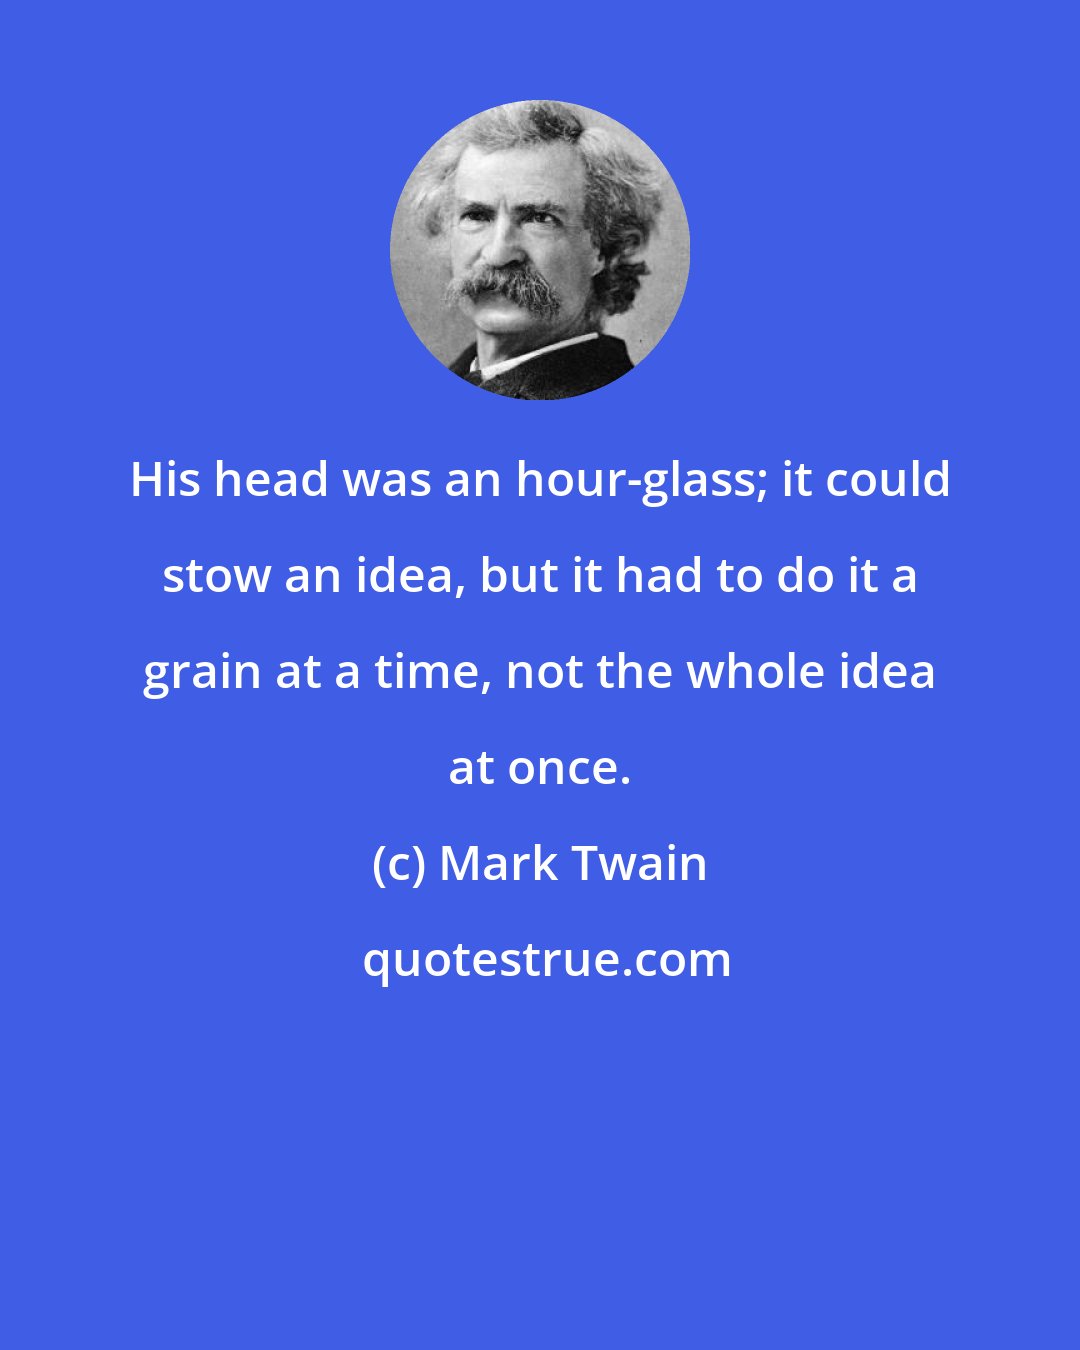 Mark Twain: His head was an hour-glass; it could stow an idea, but it had to do it a grain at a time, not the whole idea at once.